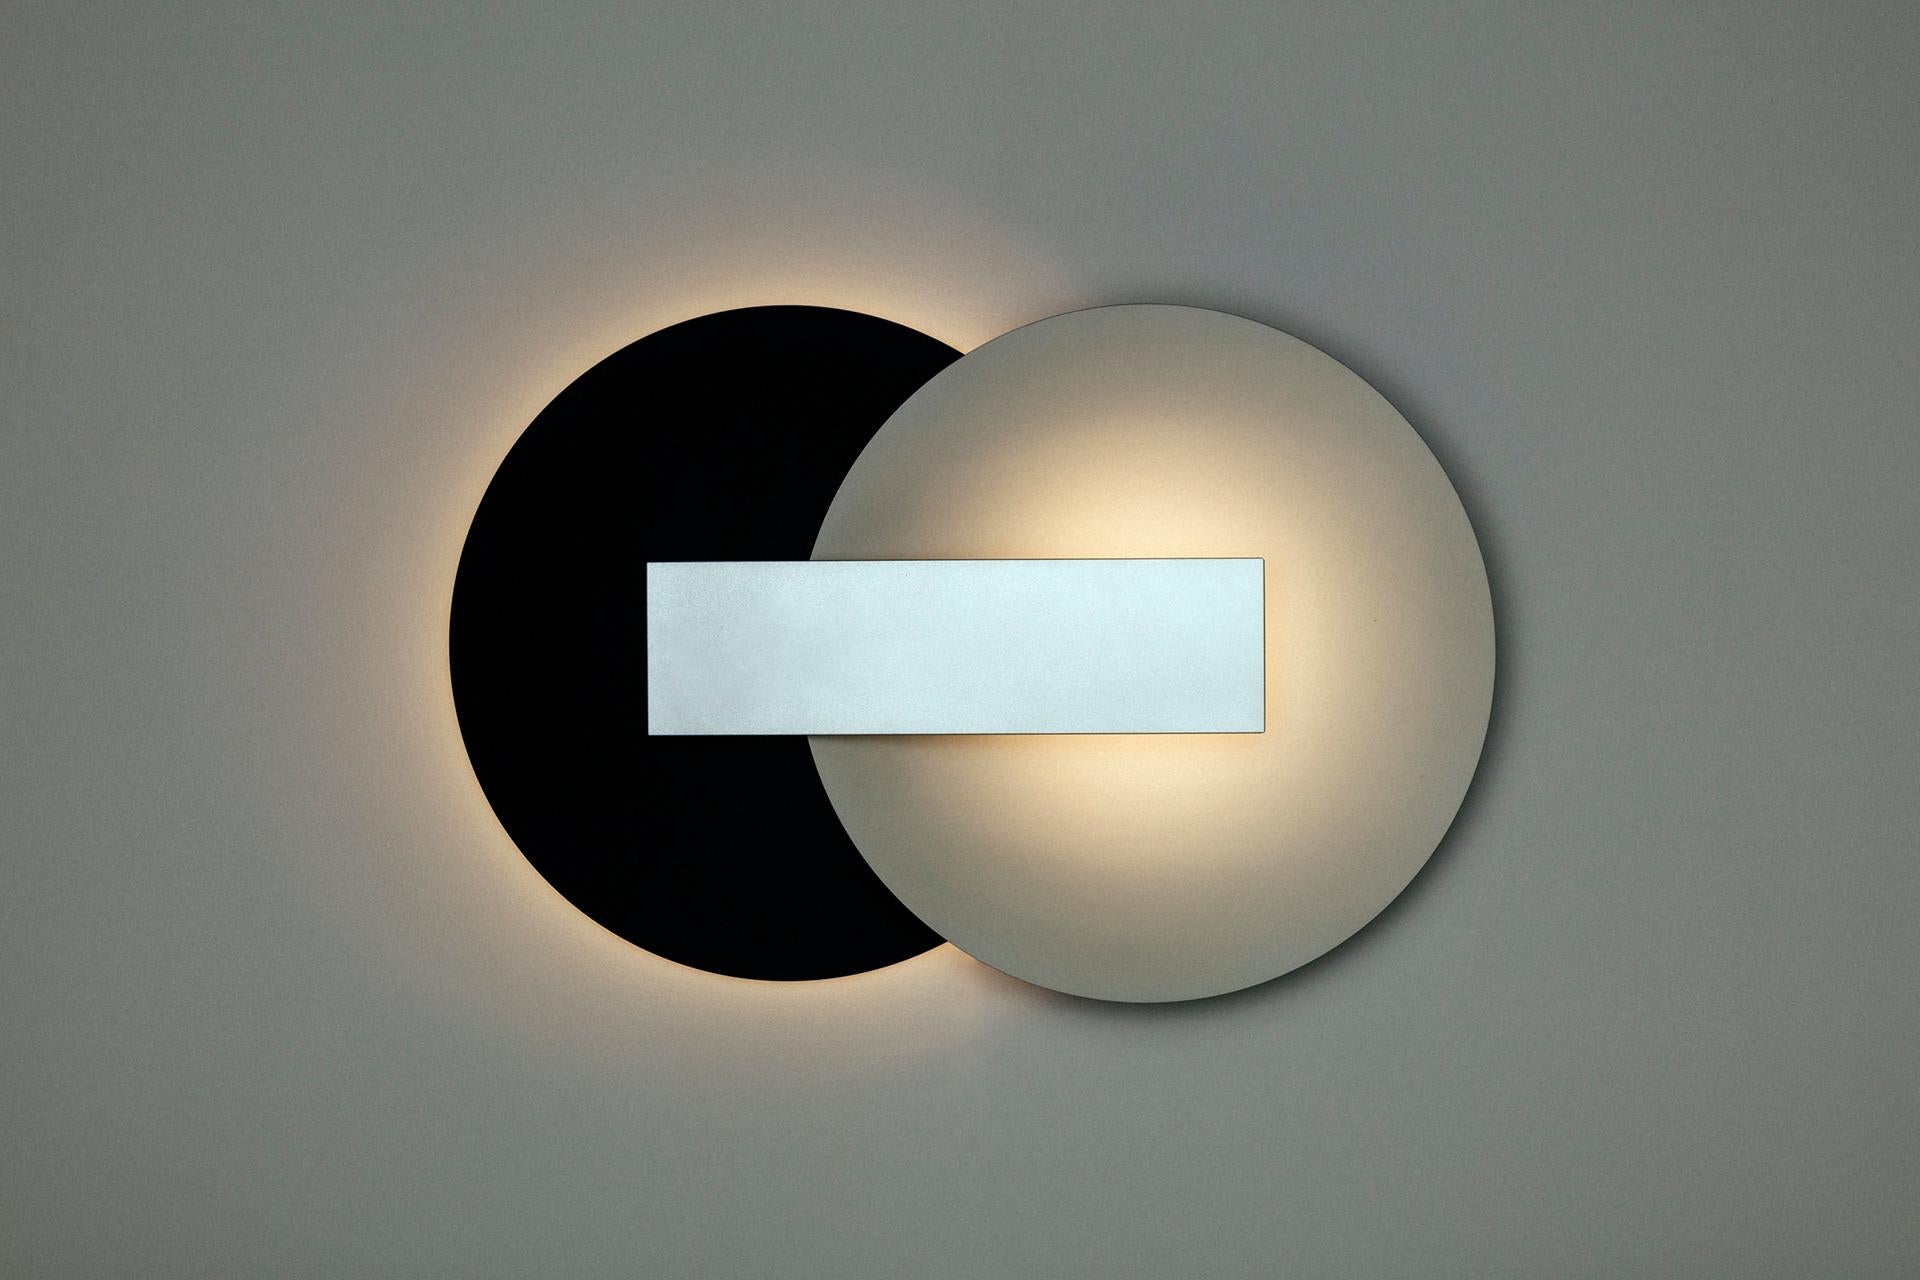 Orbe is a wall lamp with indirect light, designed to provide soft illumination to the environment.

The piece has a simple structure, composed by the minimum required for its functionality: the front box houses the light source and provides the